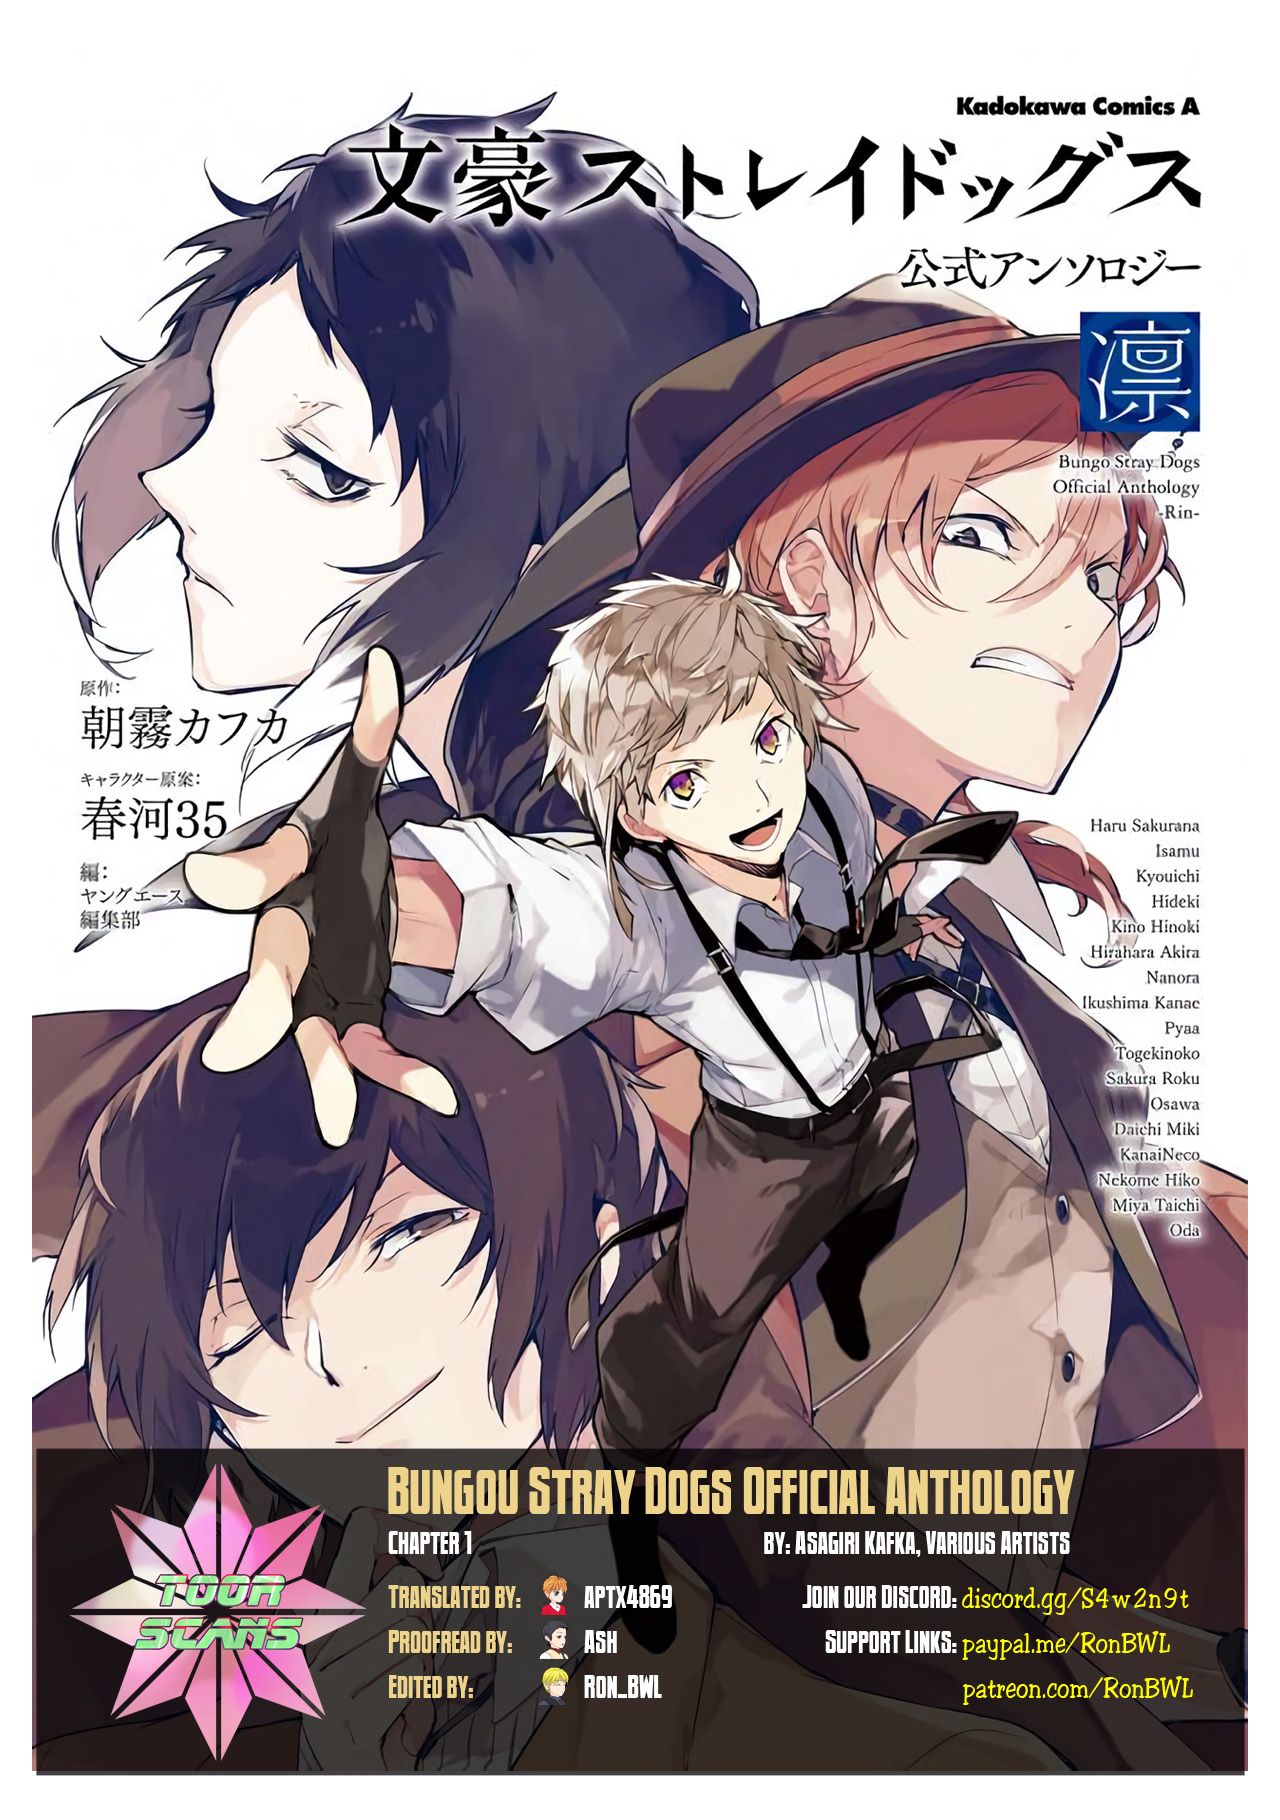 Bungou Stray Dogs Official Anthology Vol. 1 Ch. 1 Mother